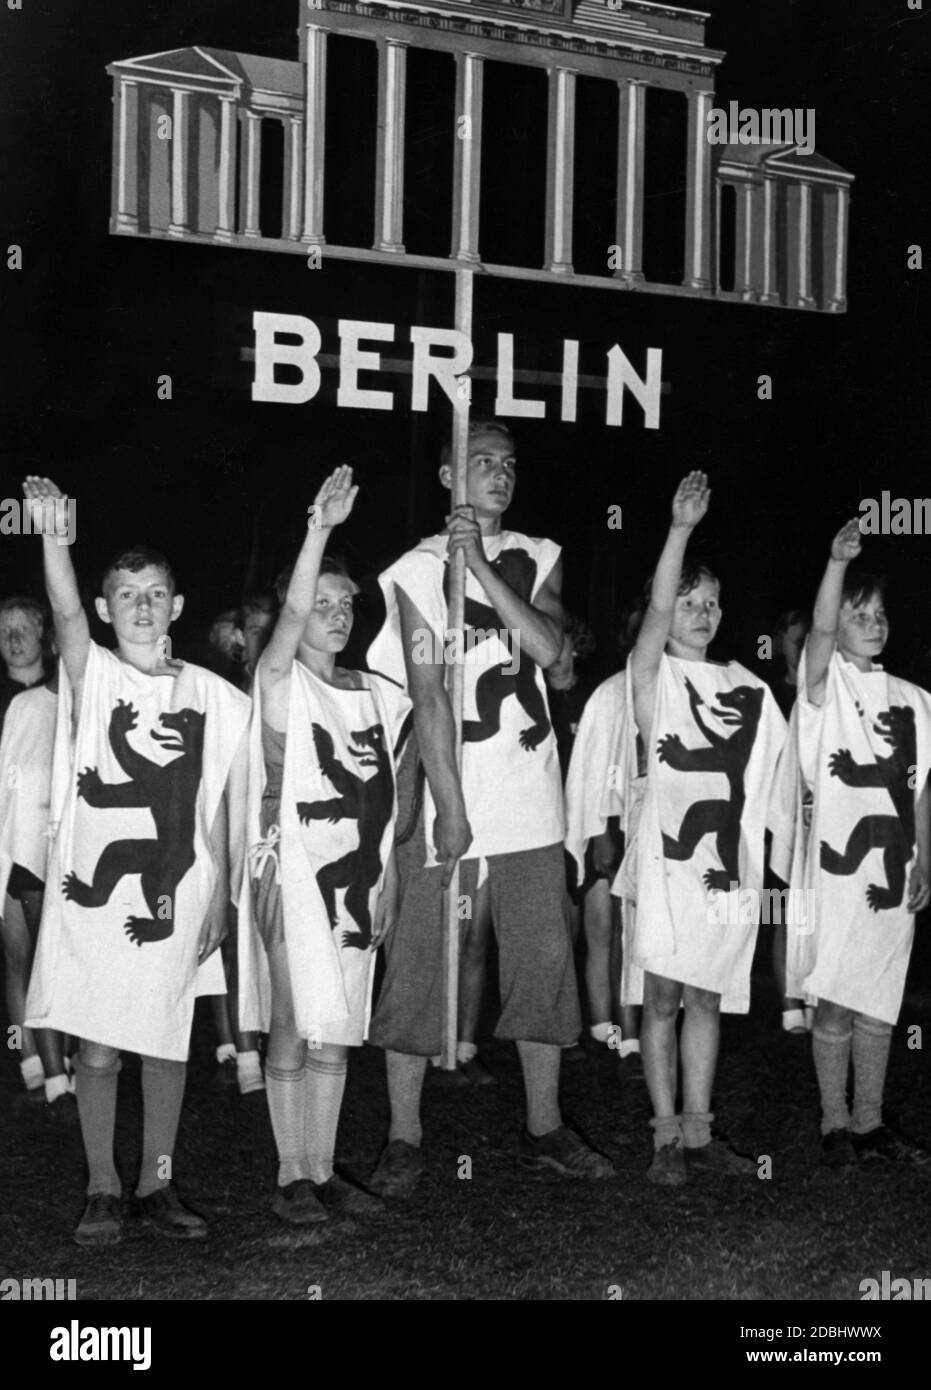 'During the movement game ''Deutscher Wille werde Licht!'' at the Festival of German Schools in the Grunewald Stadium, the herald group of the city of Berlin greets the crowd with the Nazi salute. The pupils wear the Berlin bear on their clothes and a sign with the Berlin landmark: The Brandenburg Gate.' Stock Photo